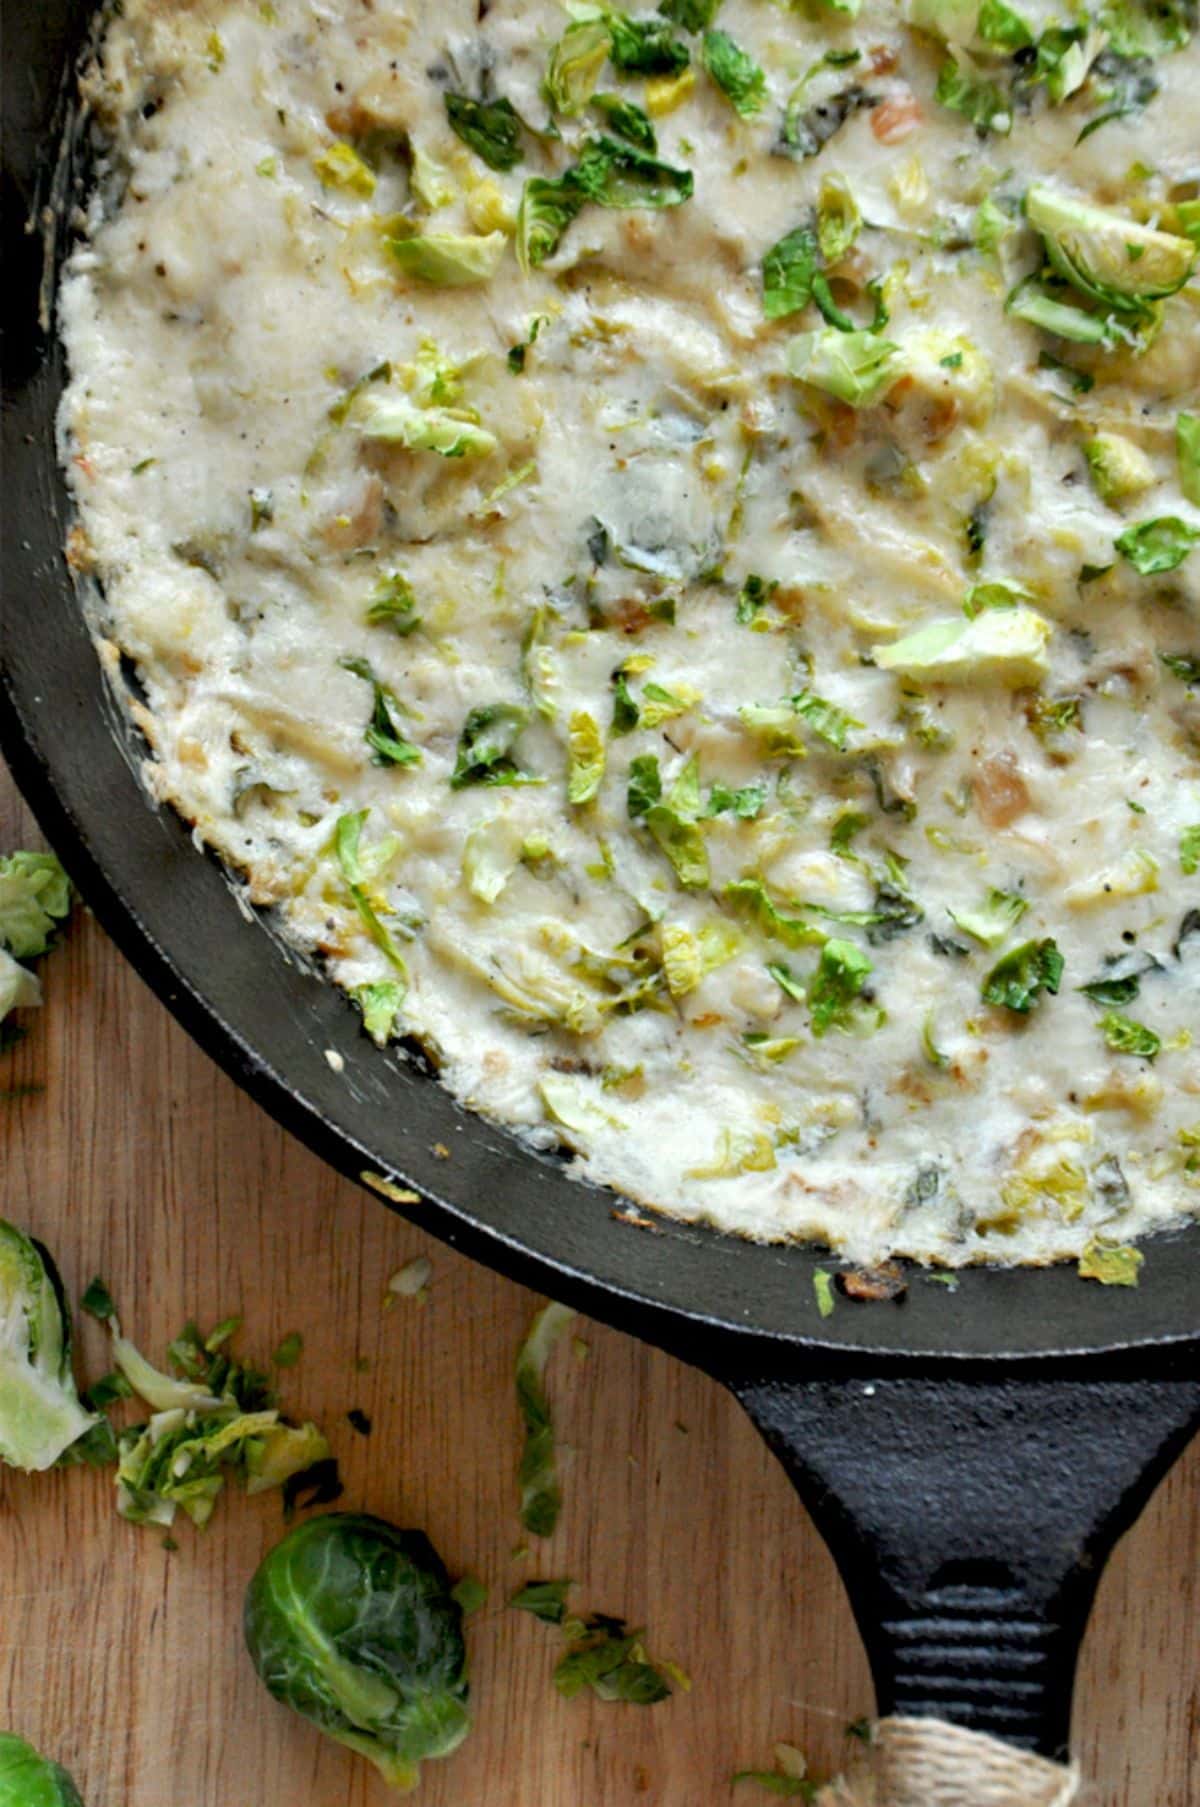 Juicy sour cream brussels sprout & shallot dip in a black skillet.